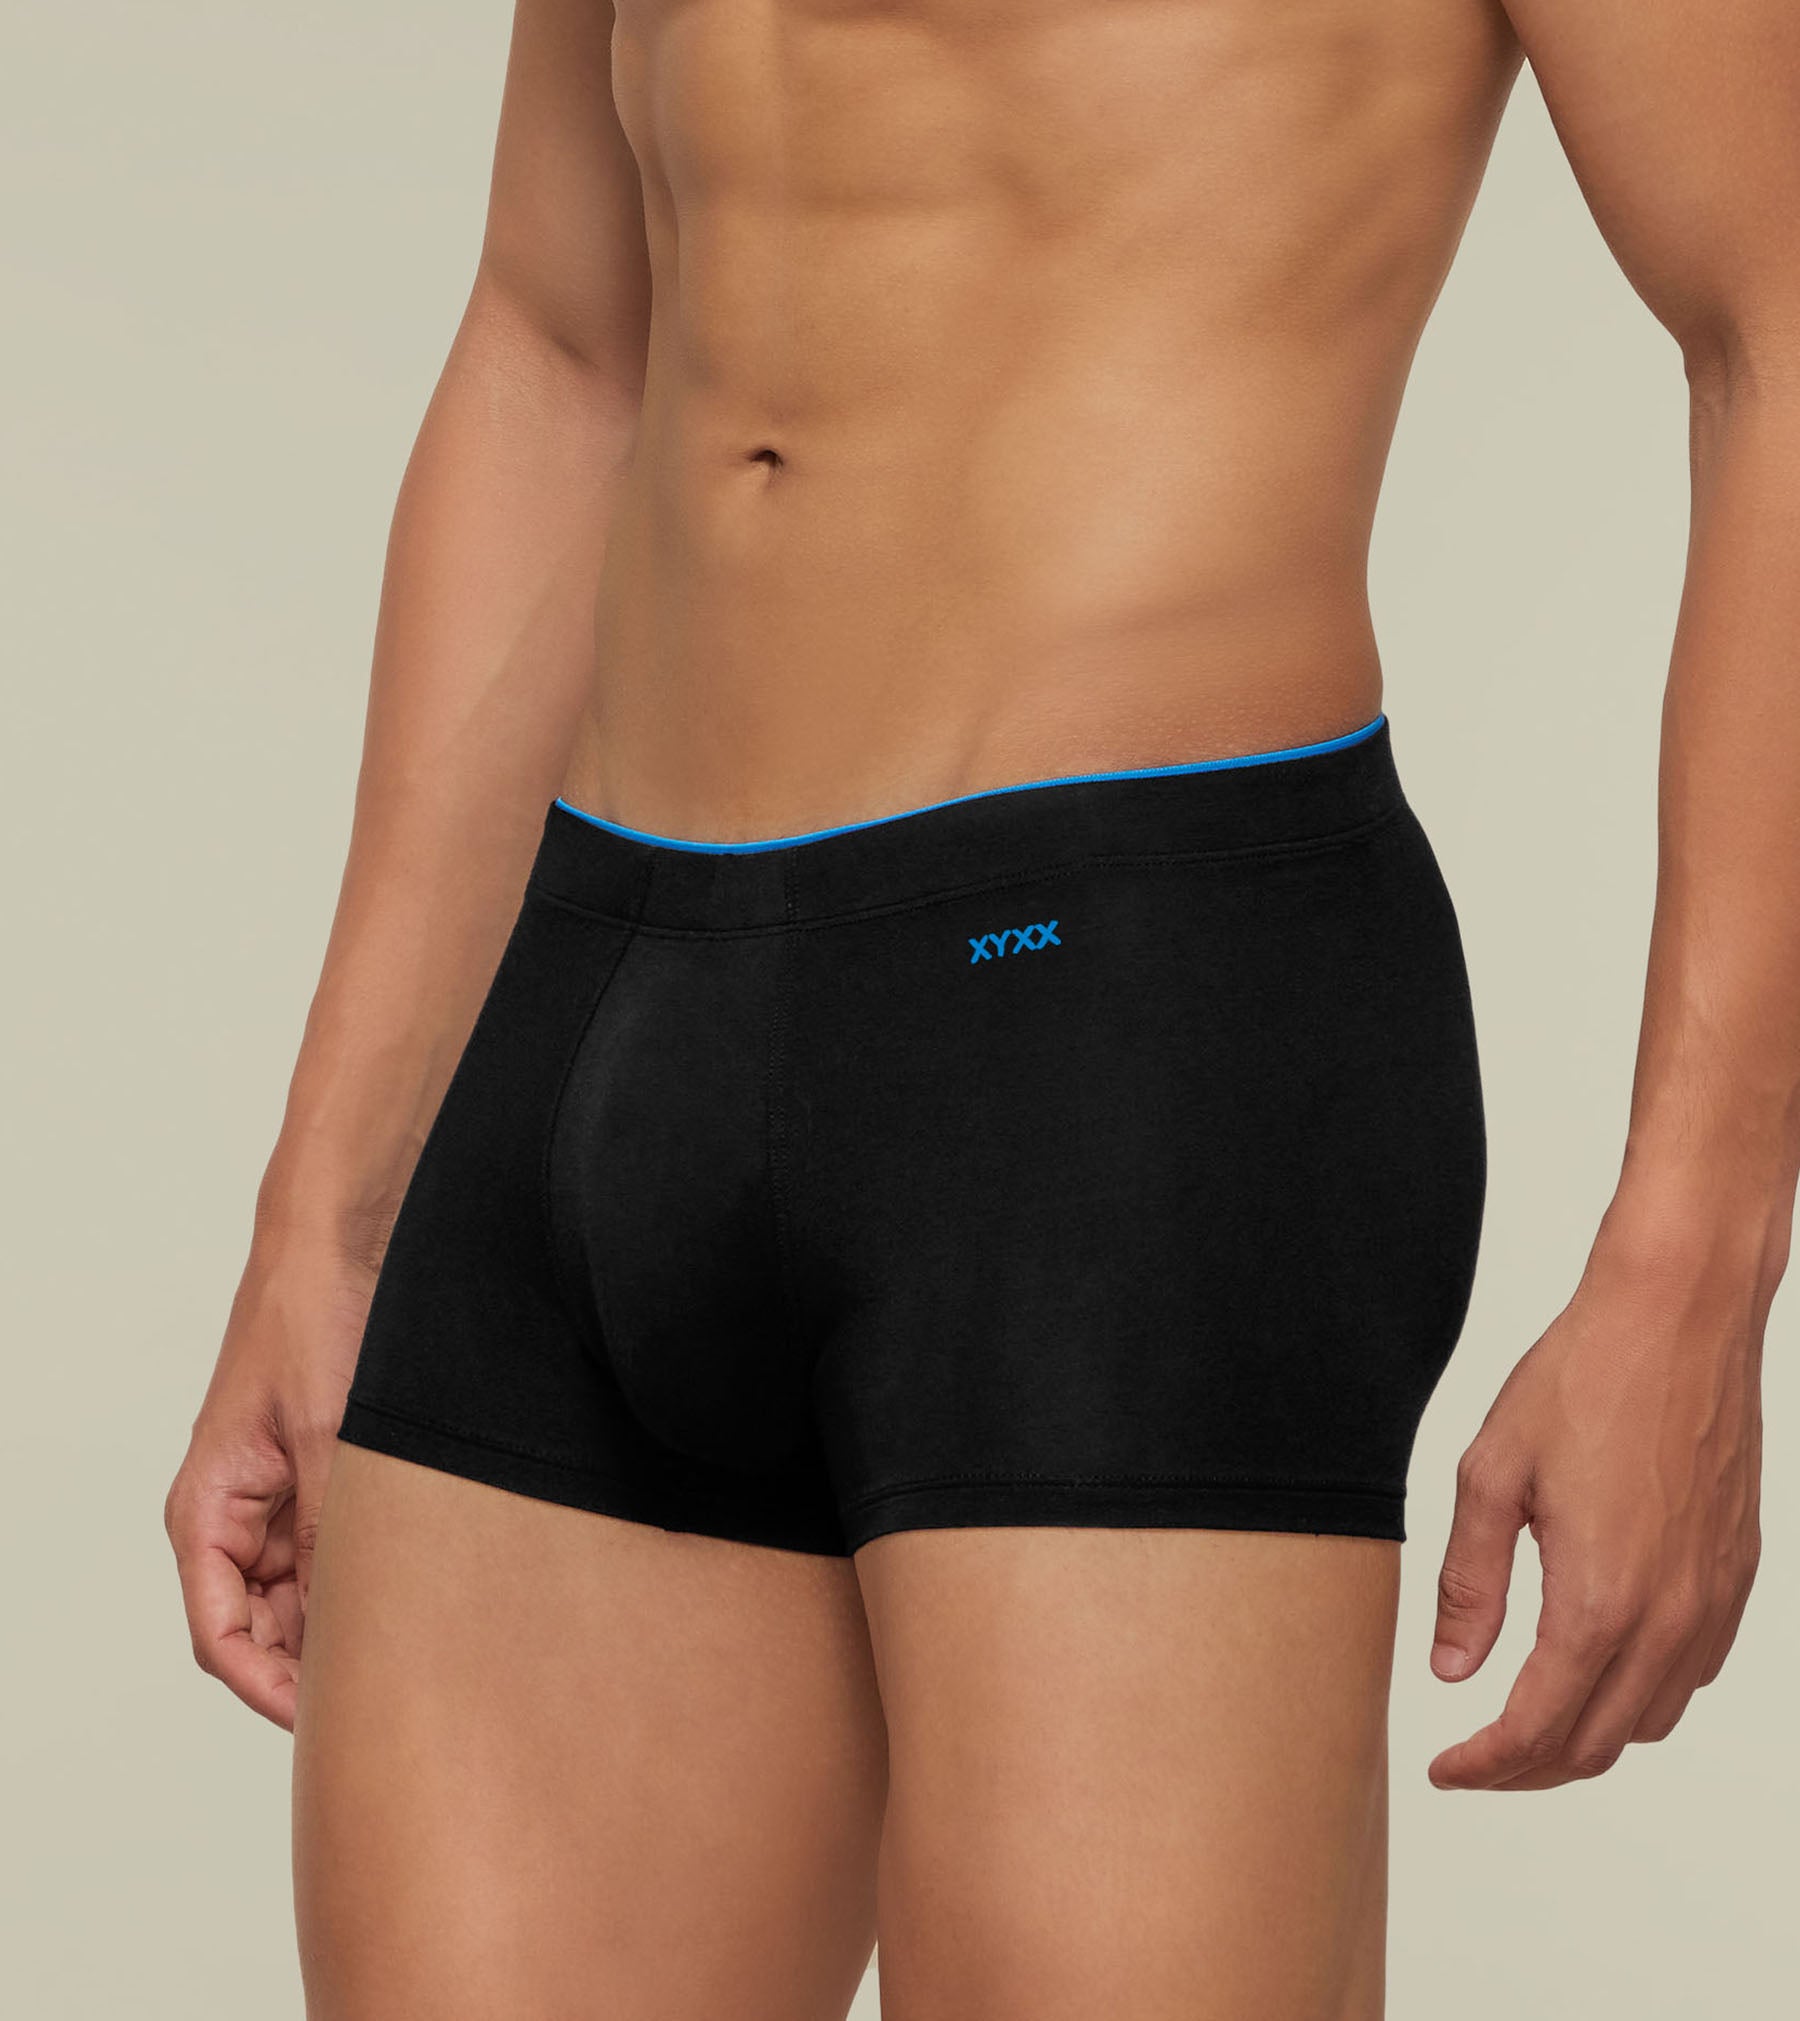 Uno Modal Trunks For Men Pack of 3 (Black, Blue, Grey) -  XYXX Mens Apparels